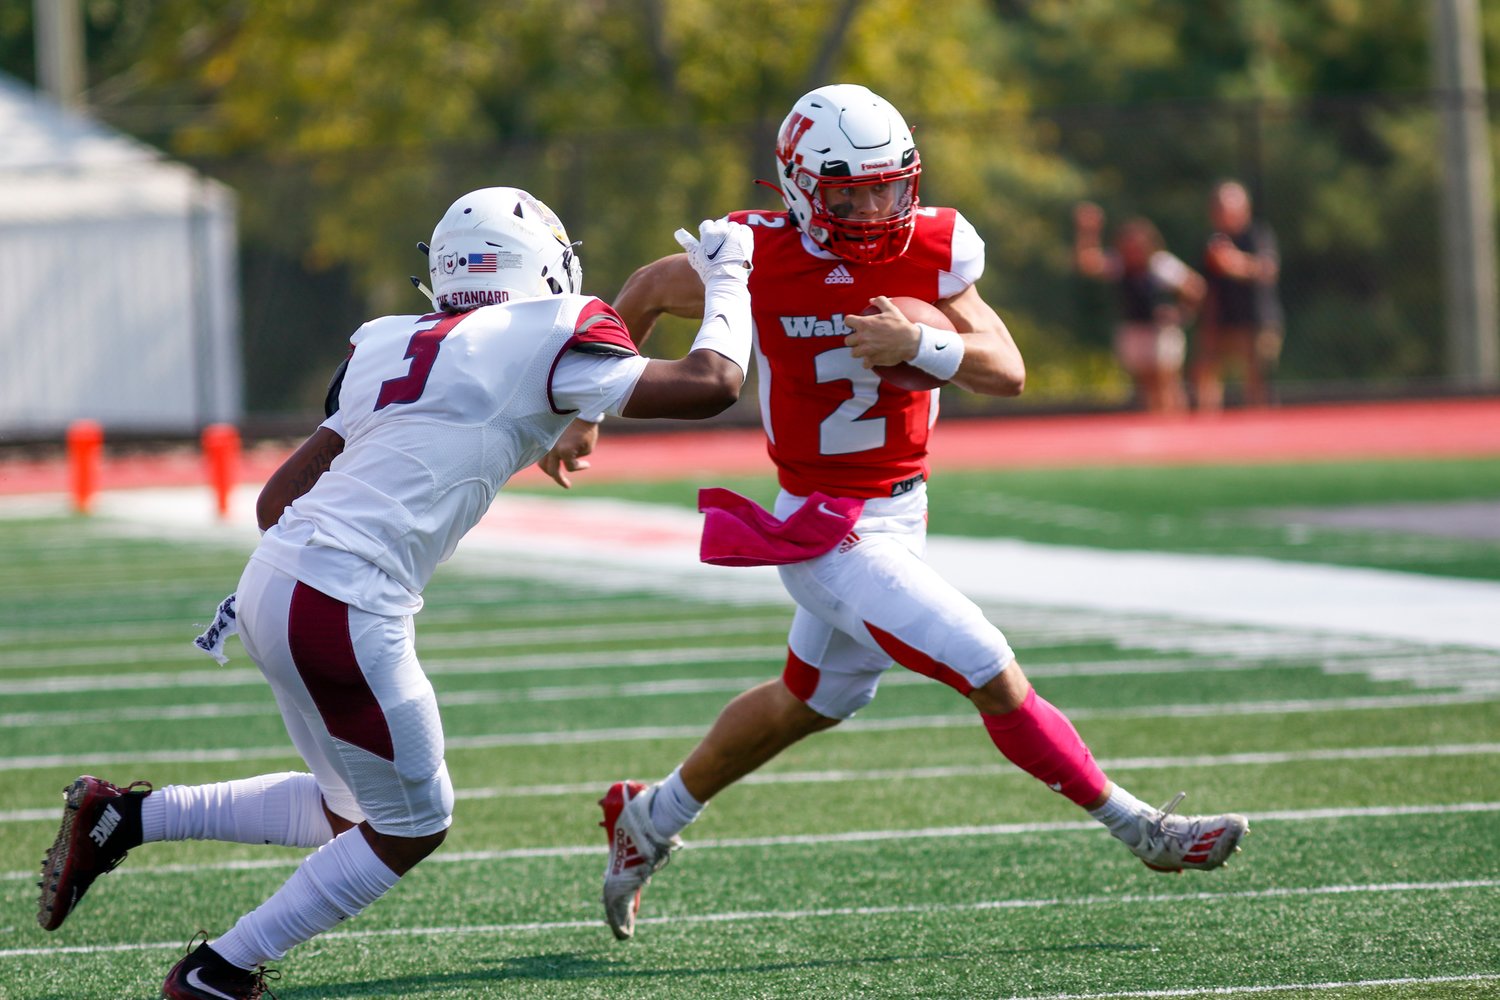 Quarterback Liam Thompson shows off his running ability vs Oberlin on Oct. 9